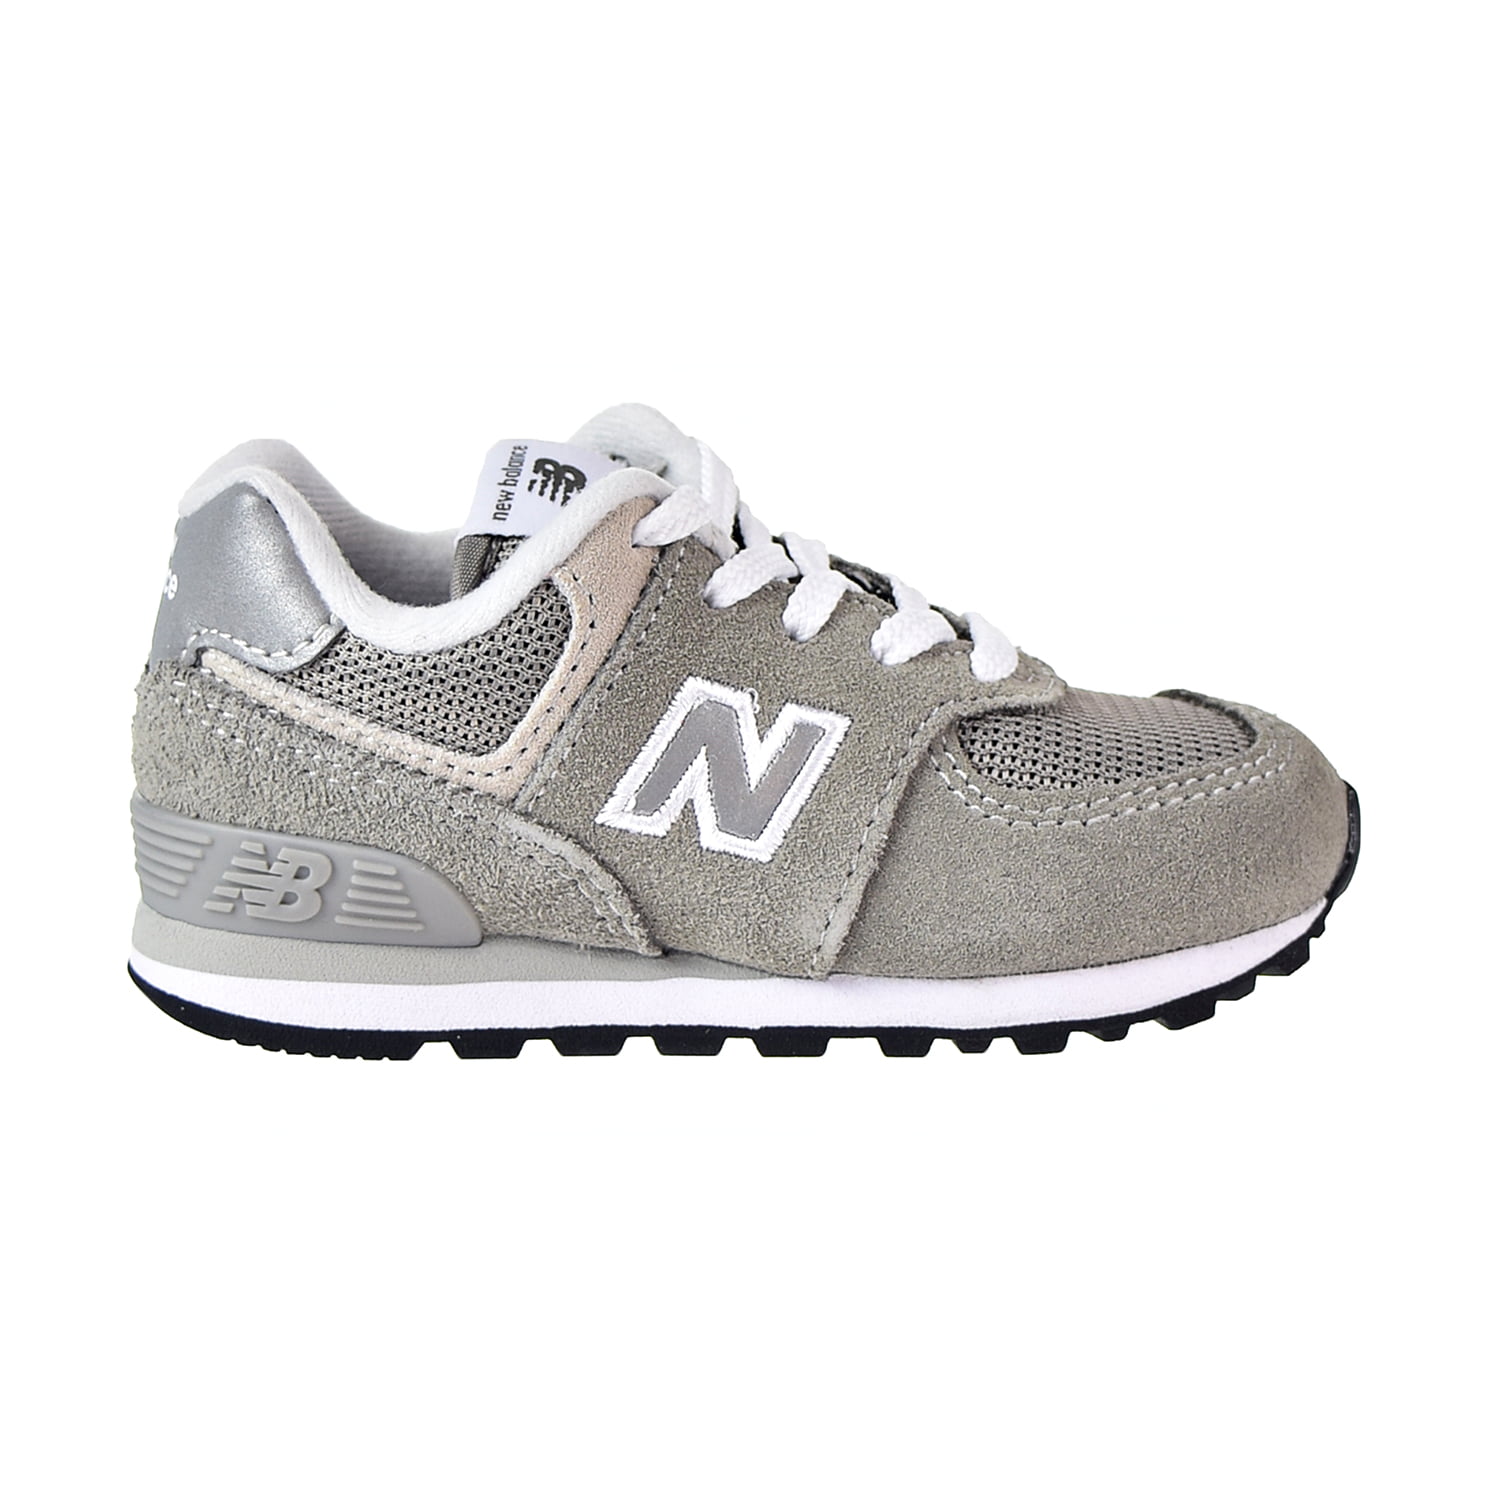 new balance toddler shoes 574